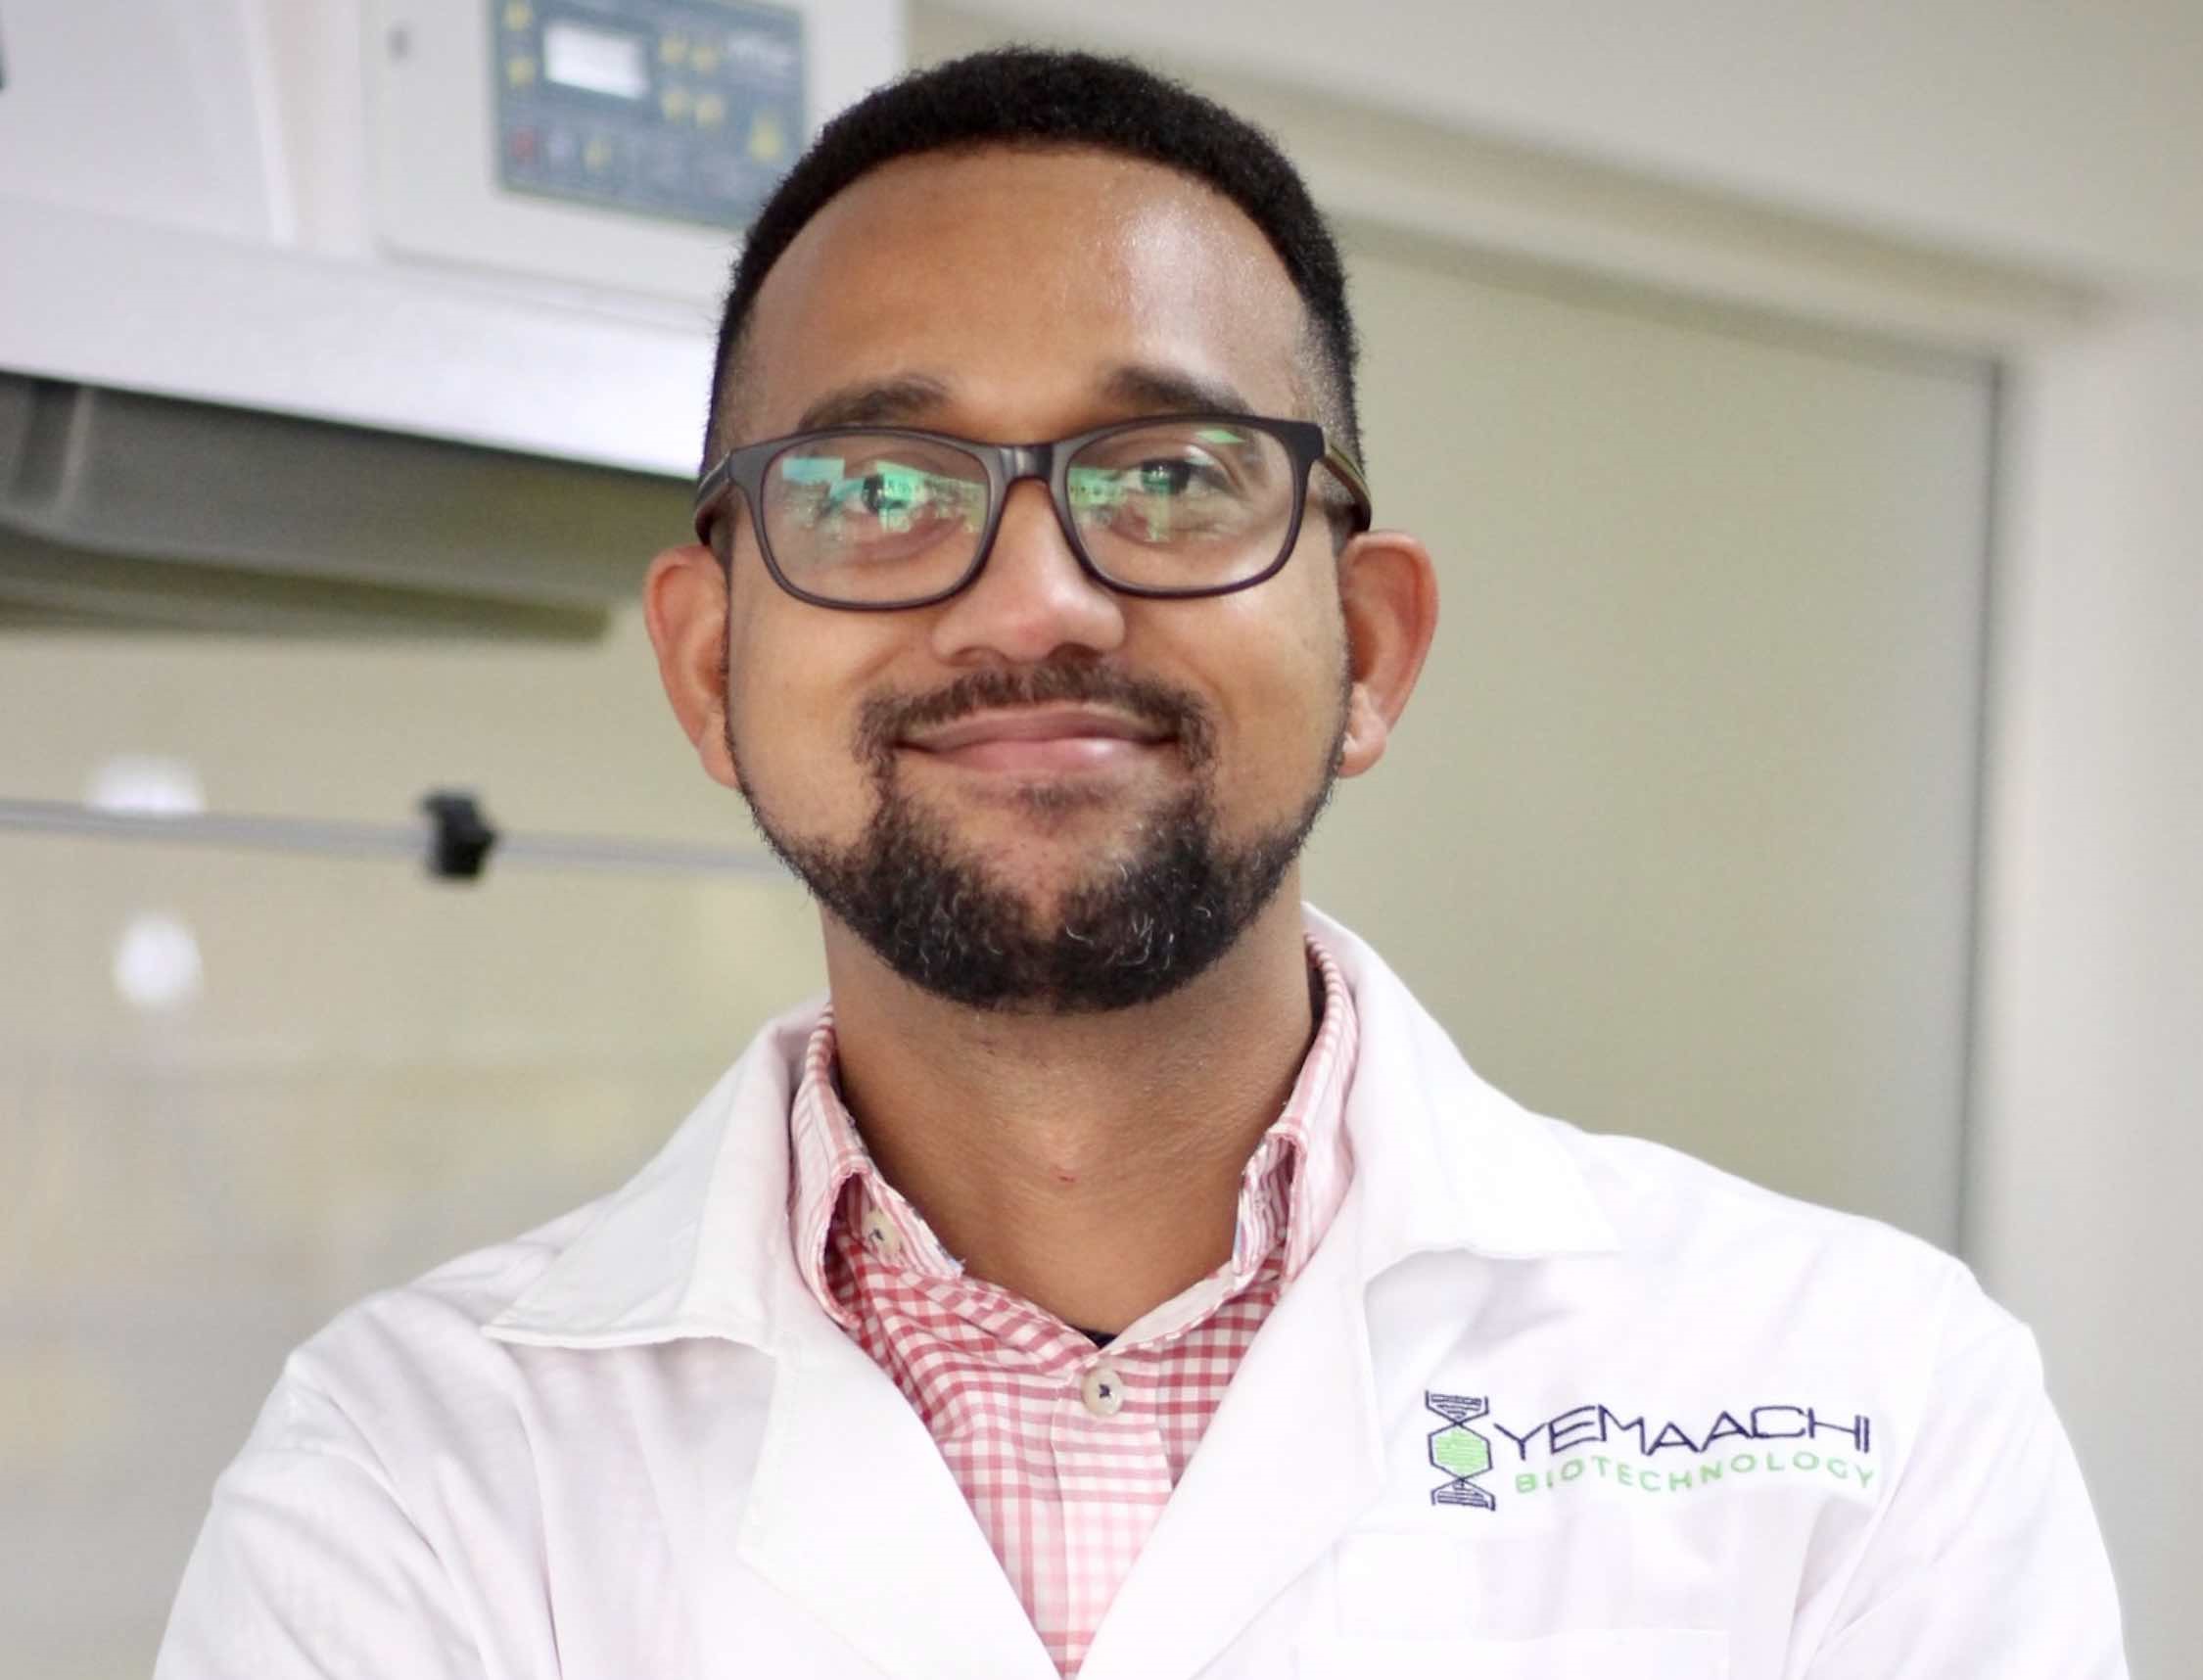 Yemaachi, a Ghanaian cancer diagnostics and research company, has raised $3 million in a seed round.